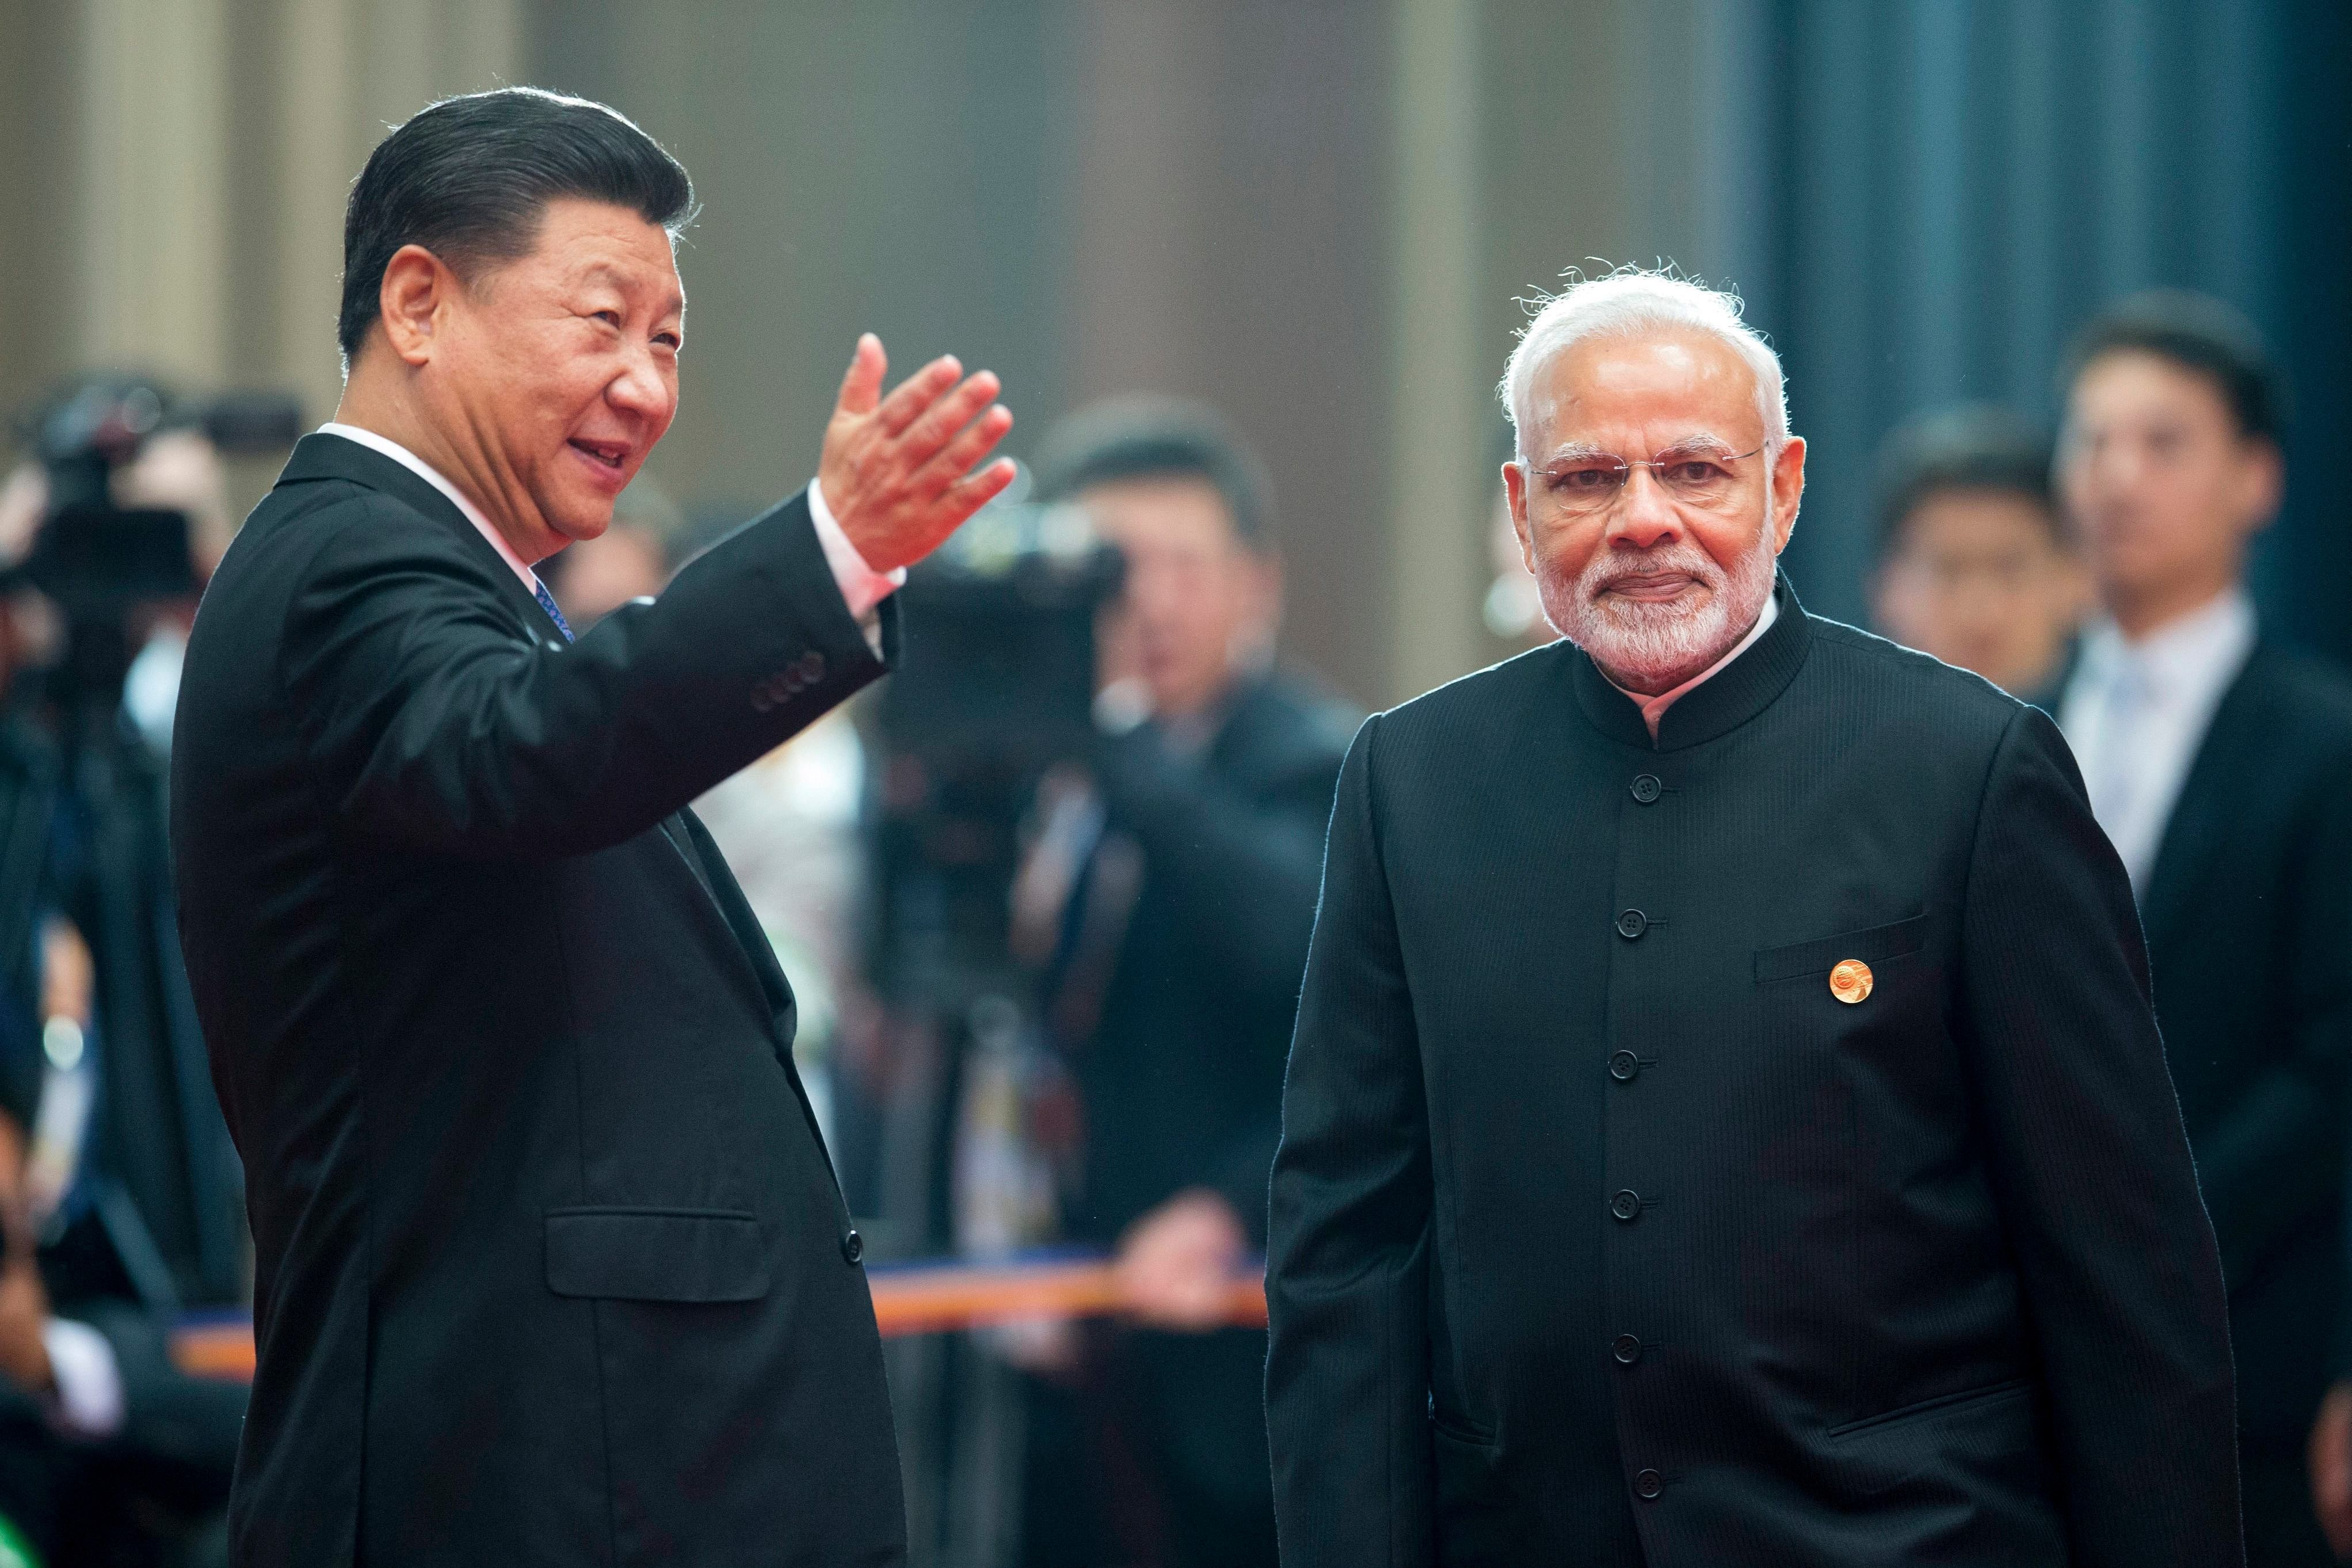 A day after Prime Minister Narendra Modi’s government barred the use of 47 clones and different versions of the previously banned 59 Chinese apps in India, Beijing asked New Delhi to “correct” its “wrongdoing”. Credit: AP